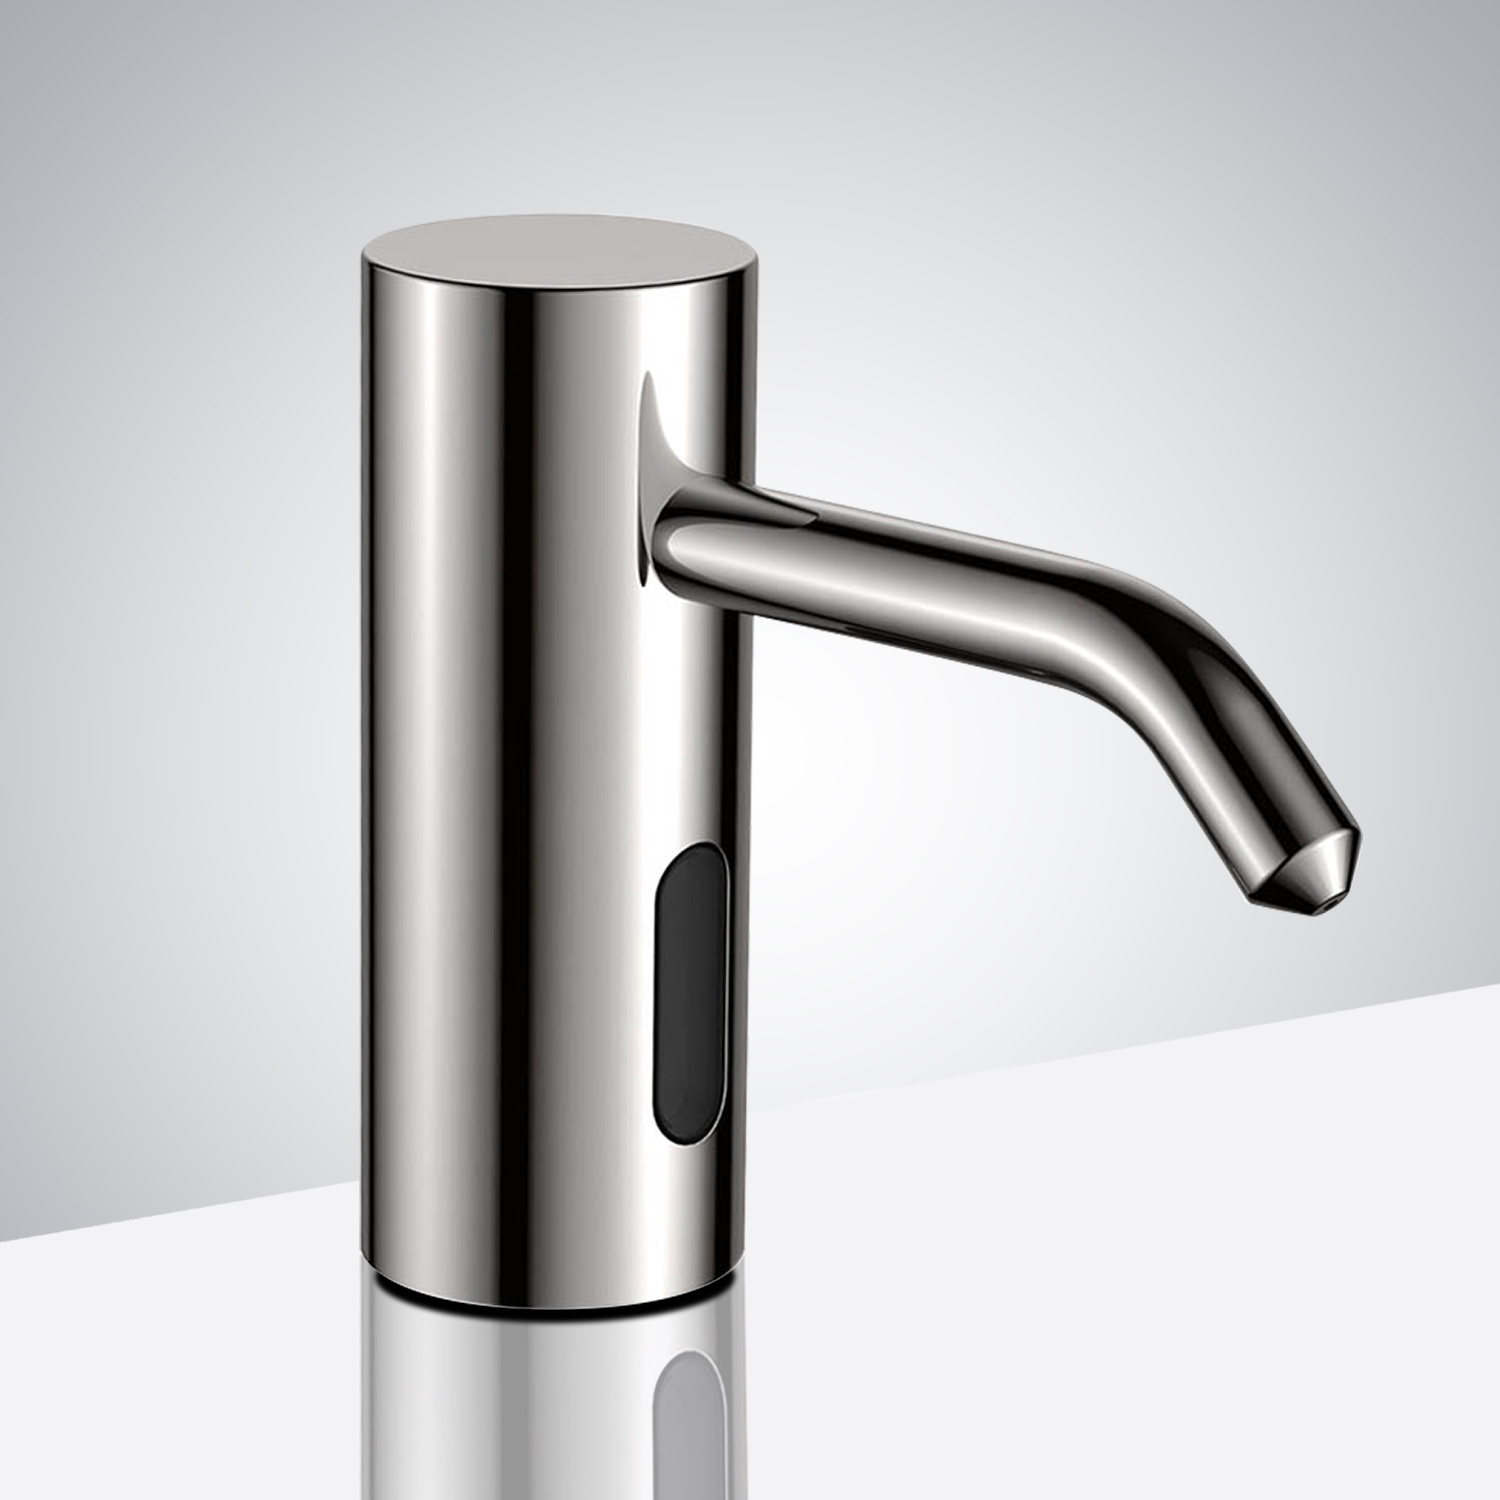 Lano Commercial Deck Mount Automatic Soap Dispenser In Brushed Nickel Finish